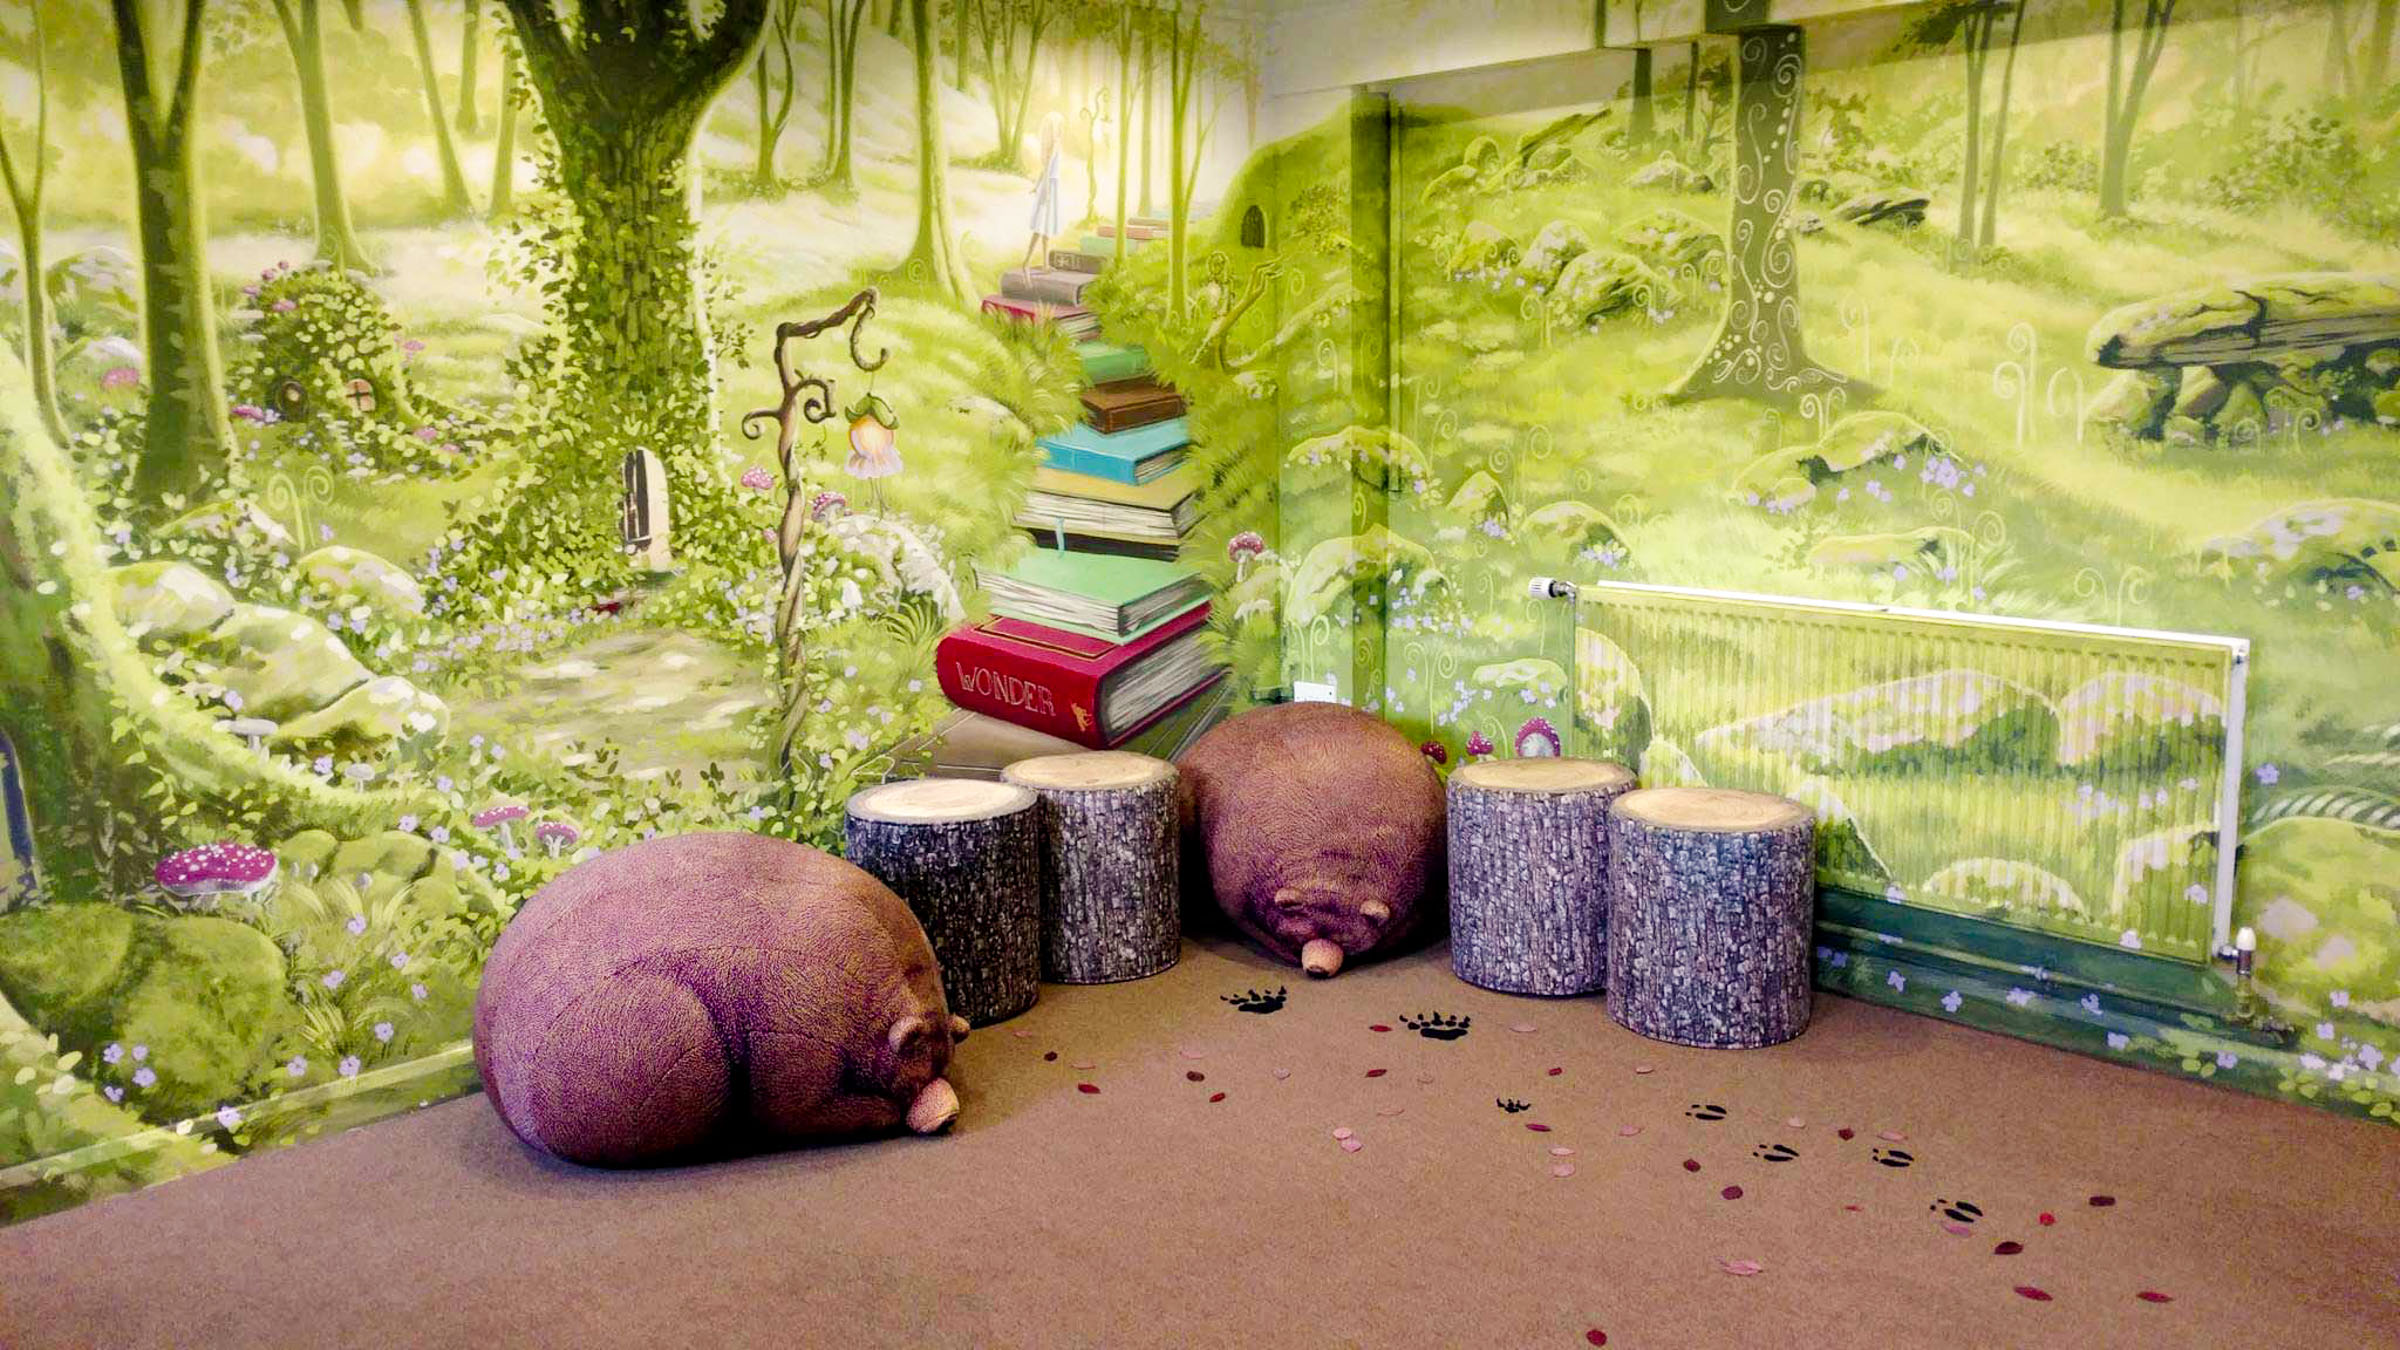 If you go down to the woods today... School library mural to inspire young minds to read